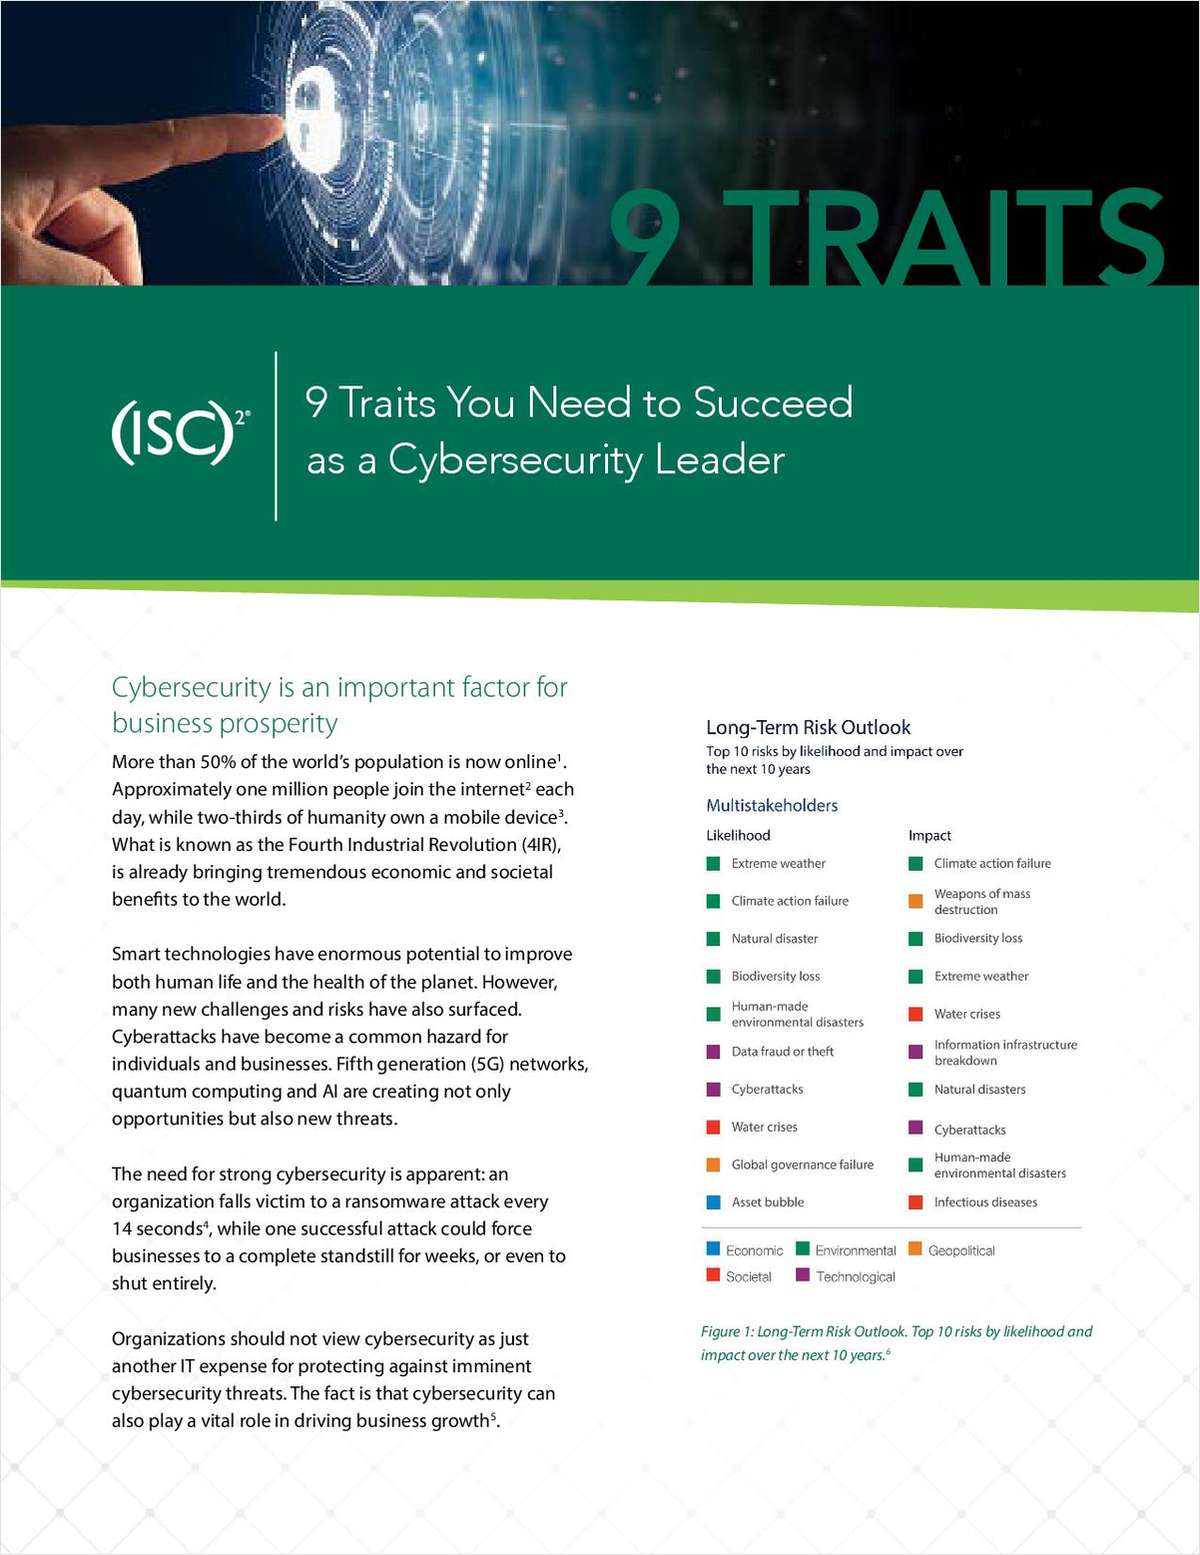 Nine Traits You Need to Succeed as a Cybersecurity Leader